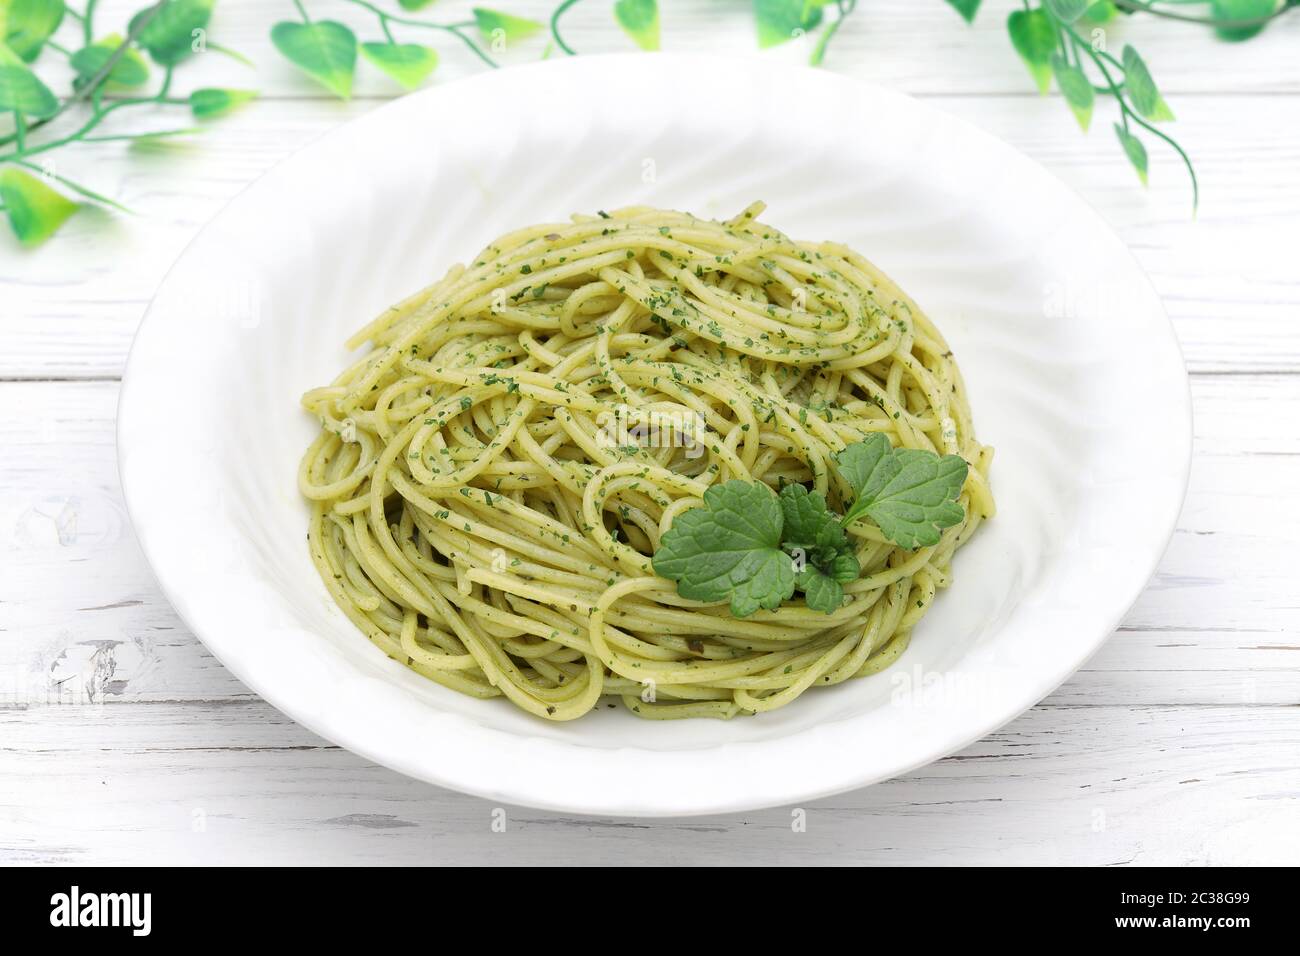 Pasta spaghetti with fresh basil leaves, cream and cheese on table Stock Photo